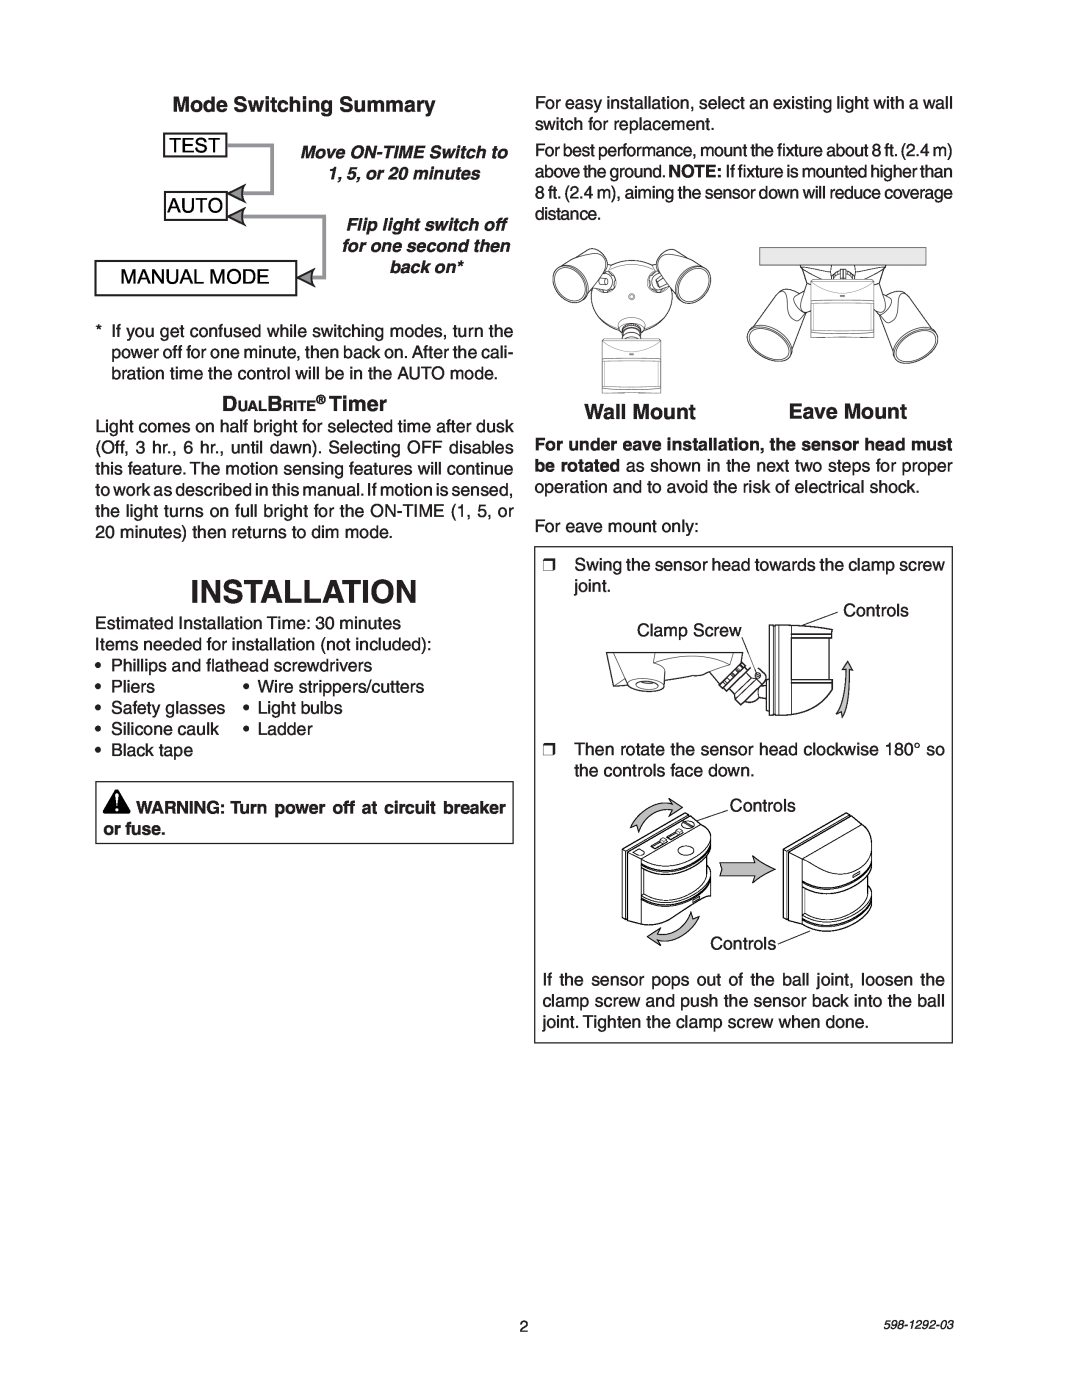 Heath Zenith UT-5105-BZ, UT-5105-WH package contents manual Installation, Test, Auto, Manual Mode, Eave Mount 